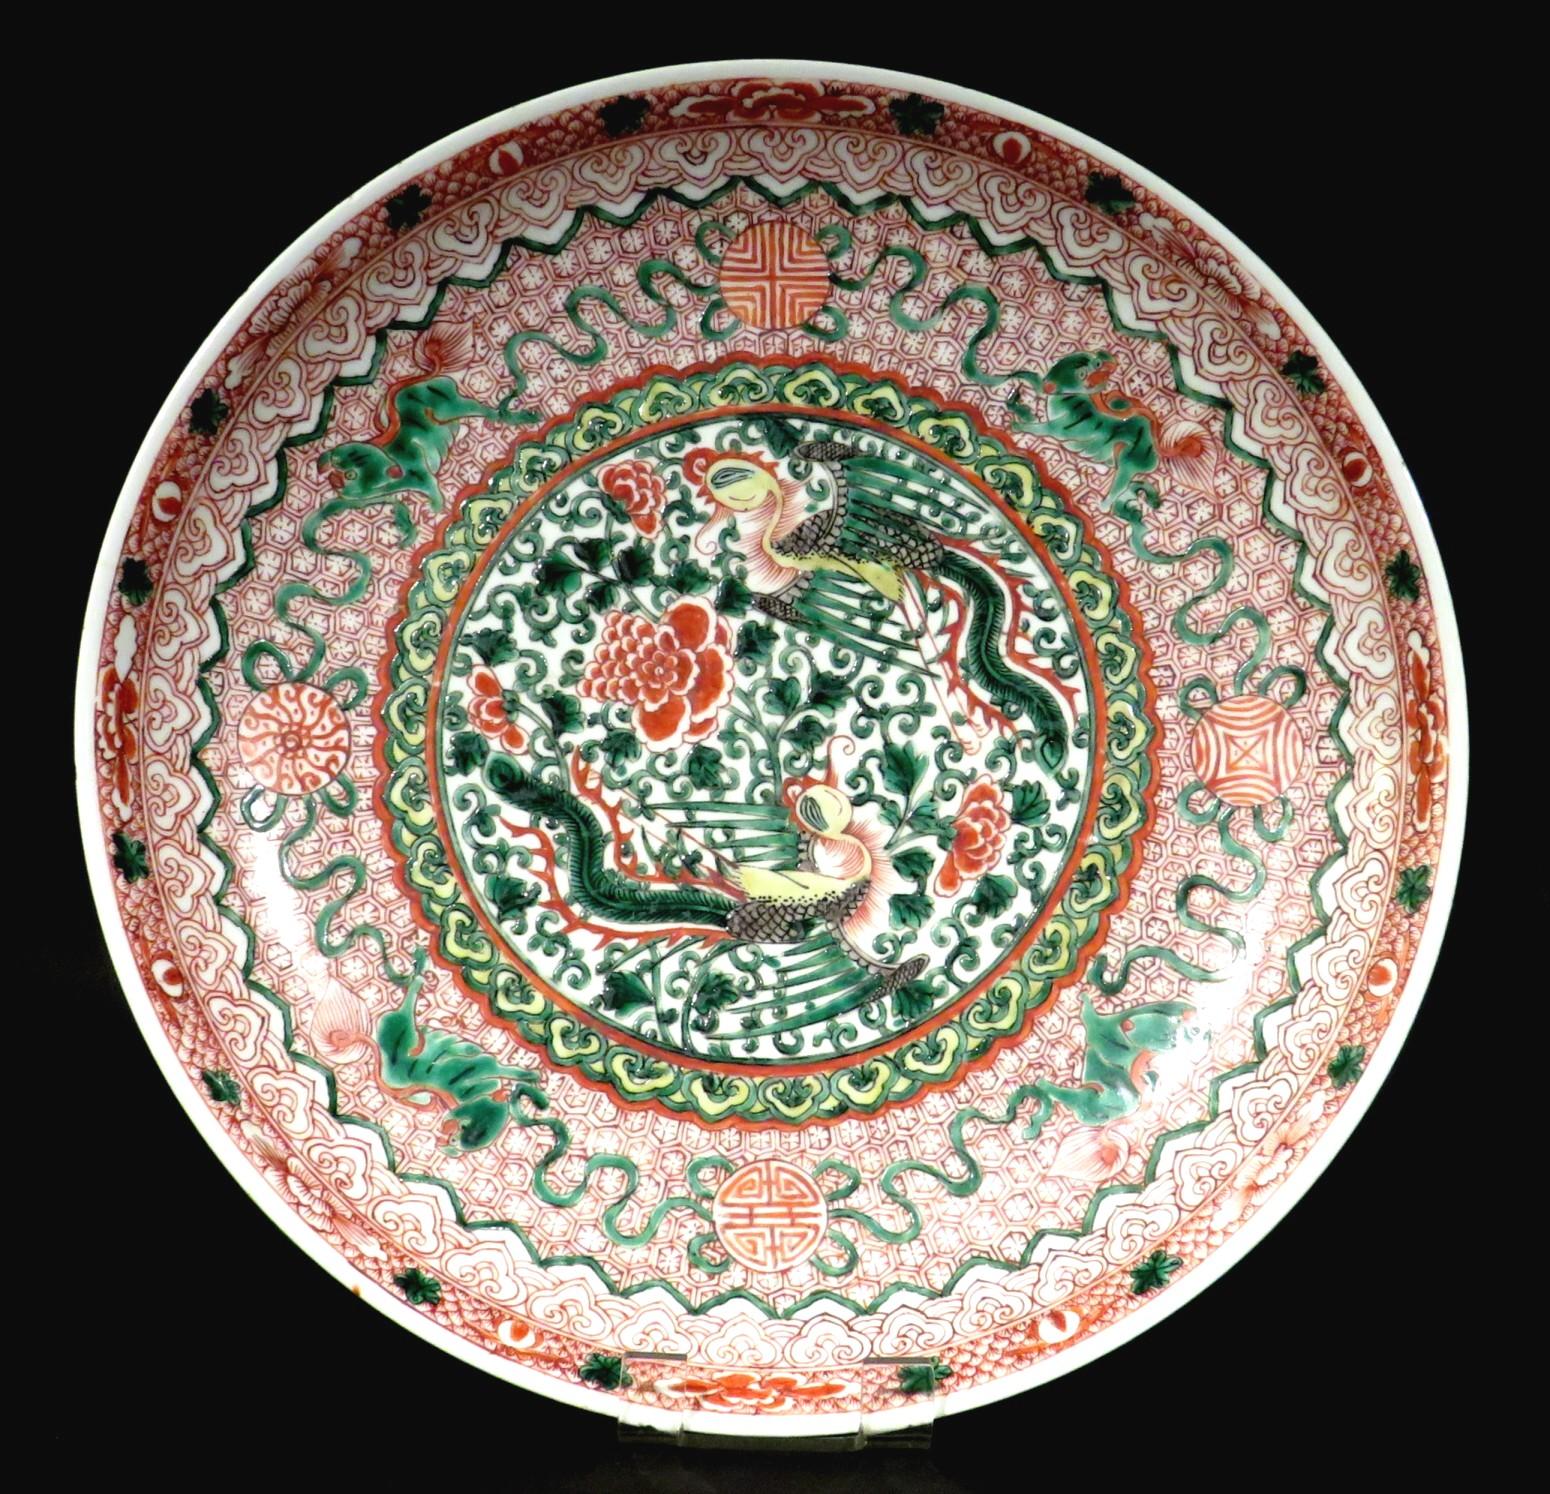 The central field depicting two mythological feng-huang (phoenix's) encircling chrysanthemum blossoms & scrolling vines within a band of ruyi-heads, the cavetto rising to an iron red ground of repeating diaper designs interspersed by auspicious